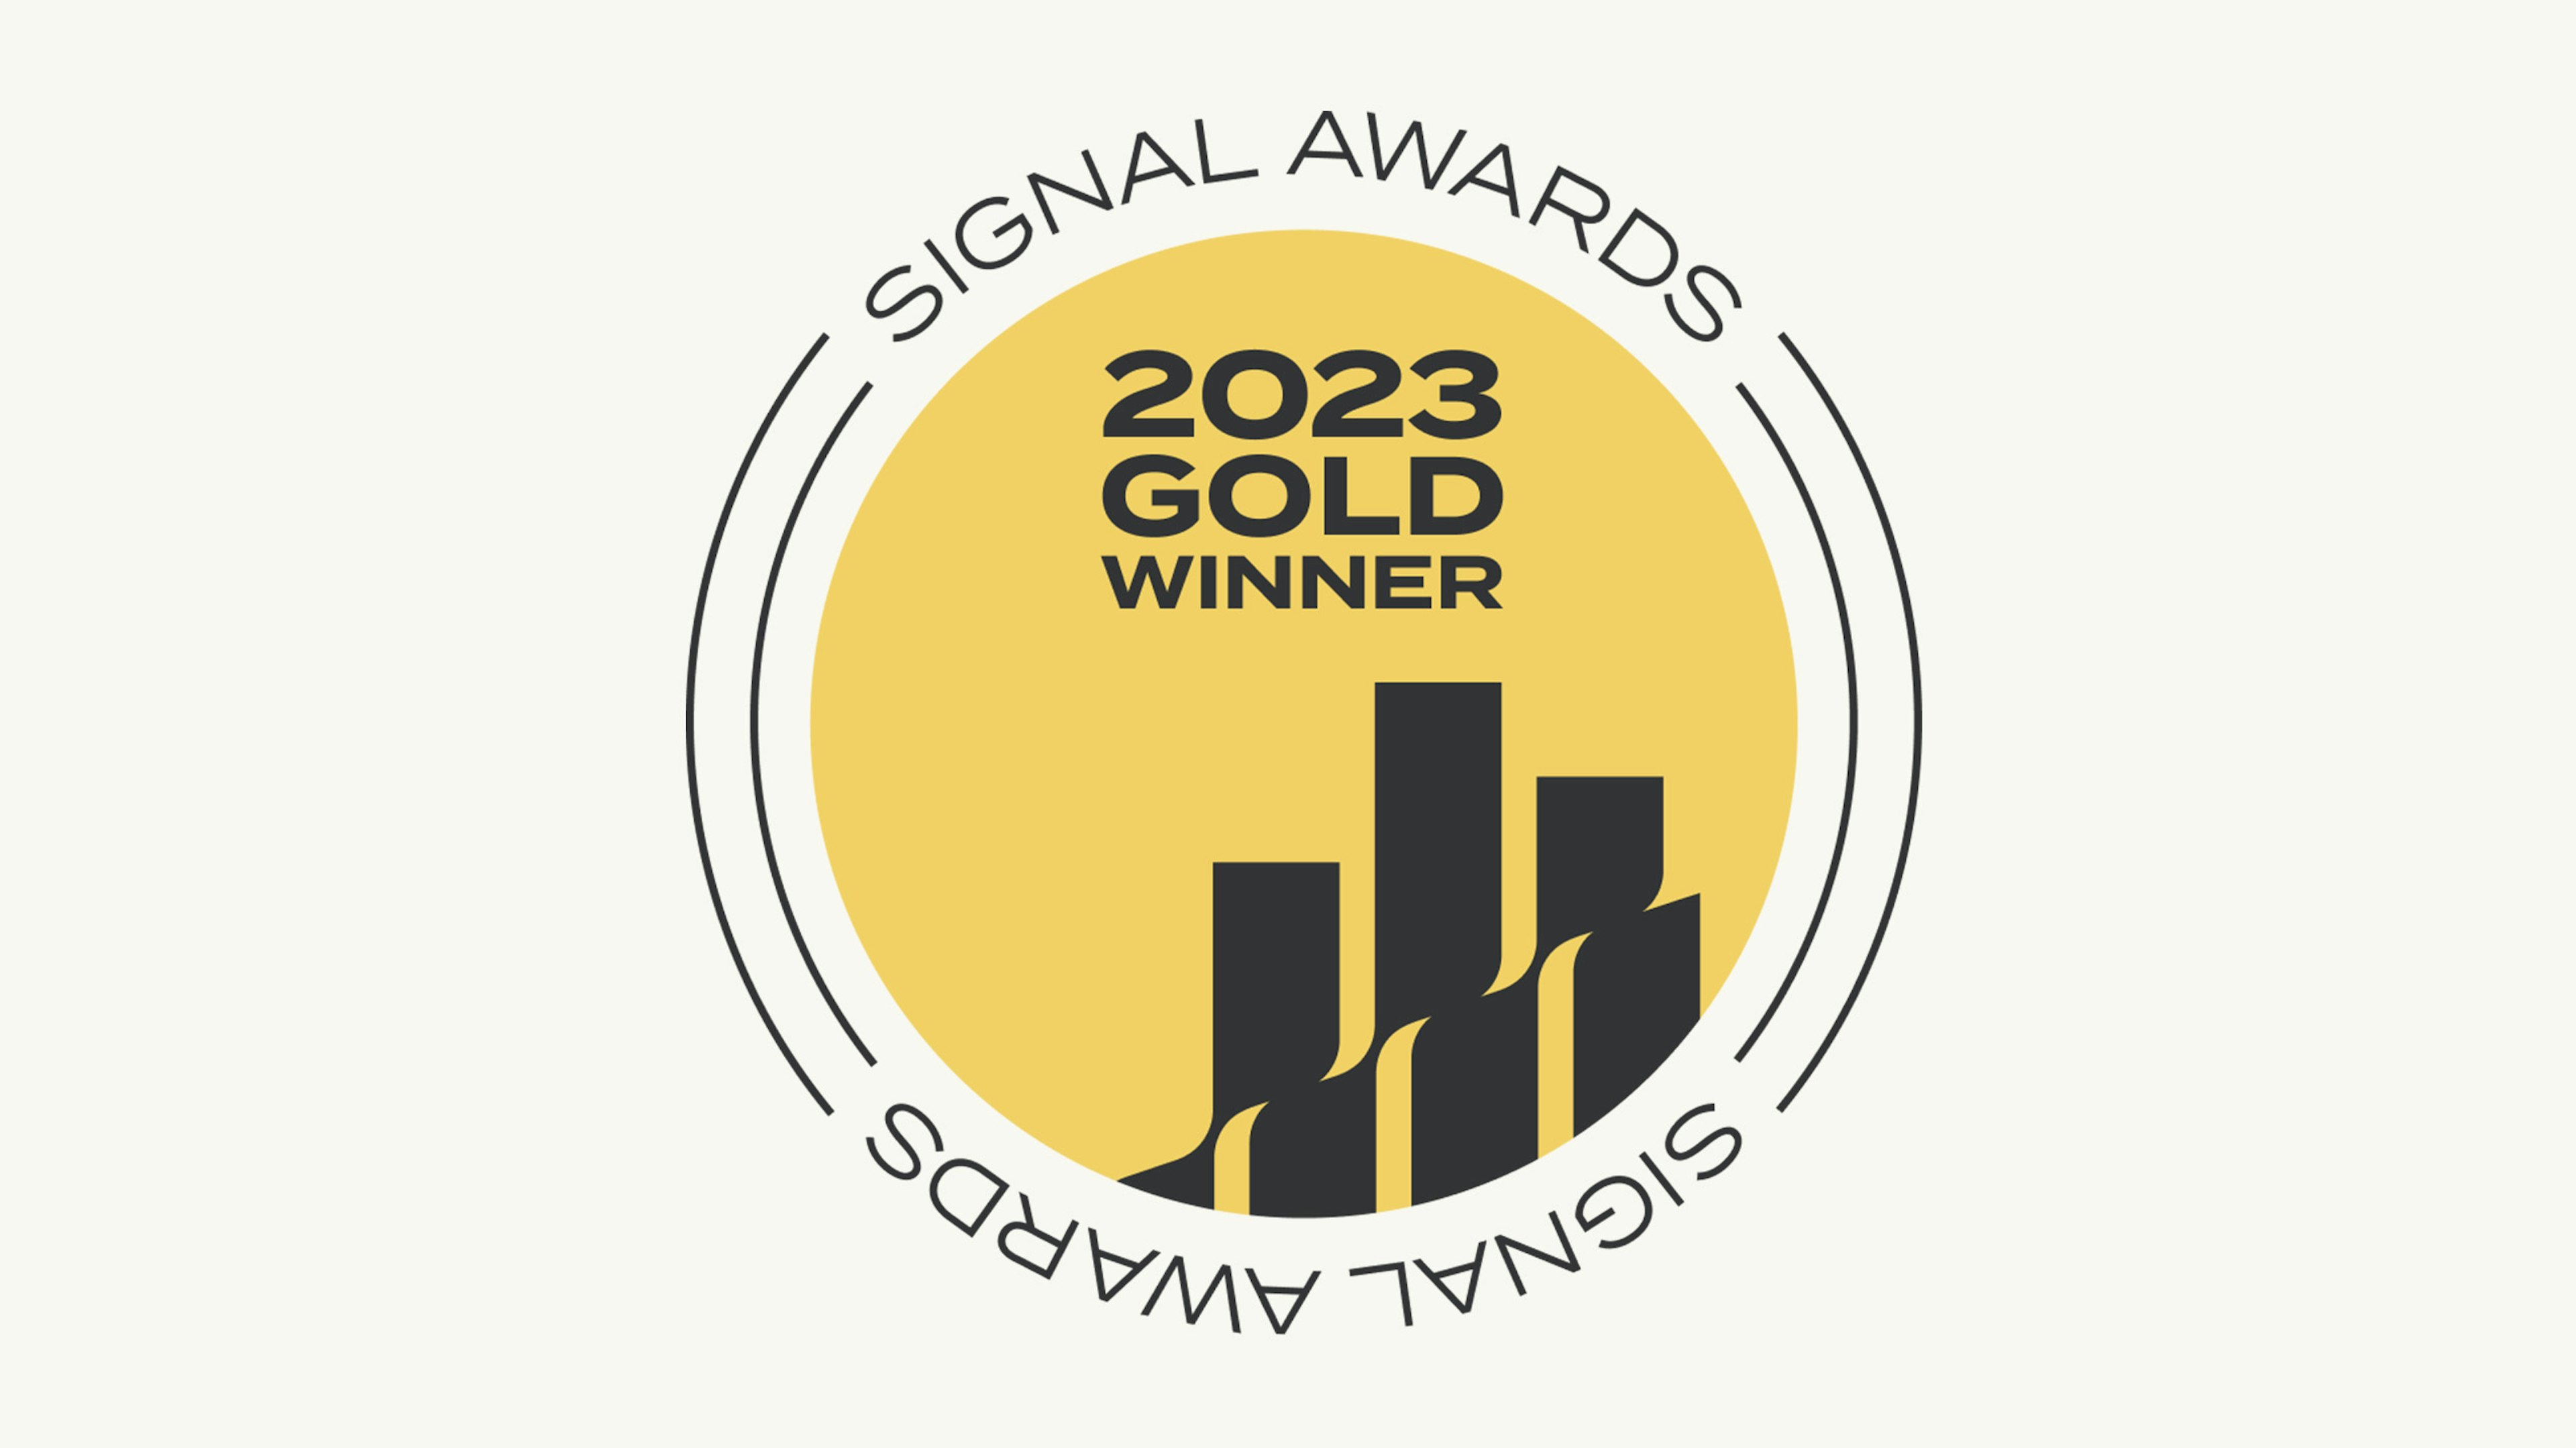 Signal Awards emblem with 2023 Gold Winner written in the center of a circle